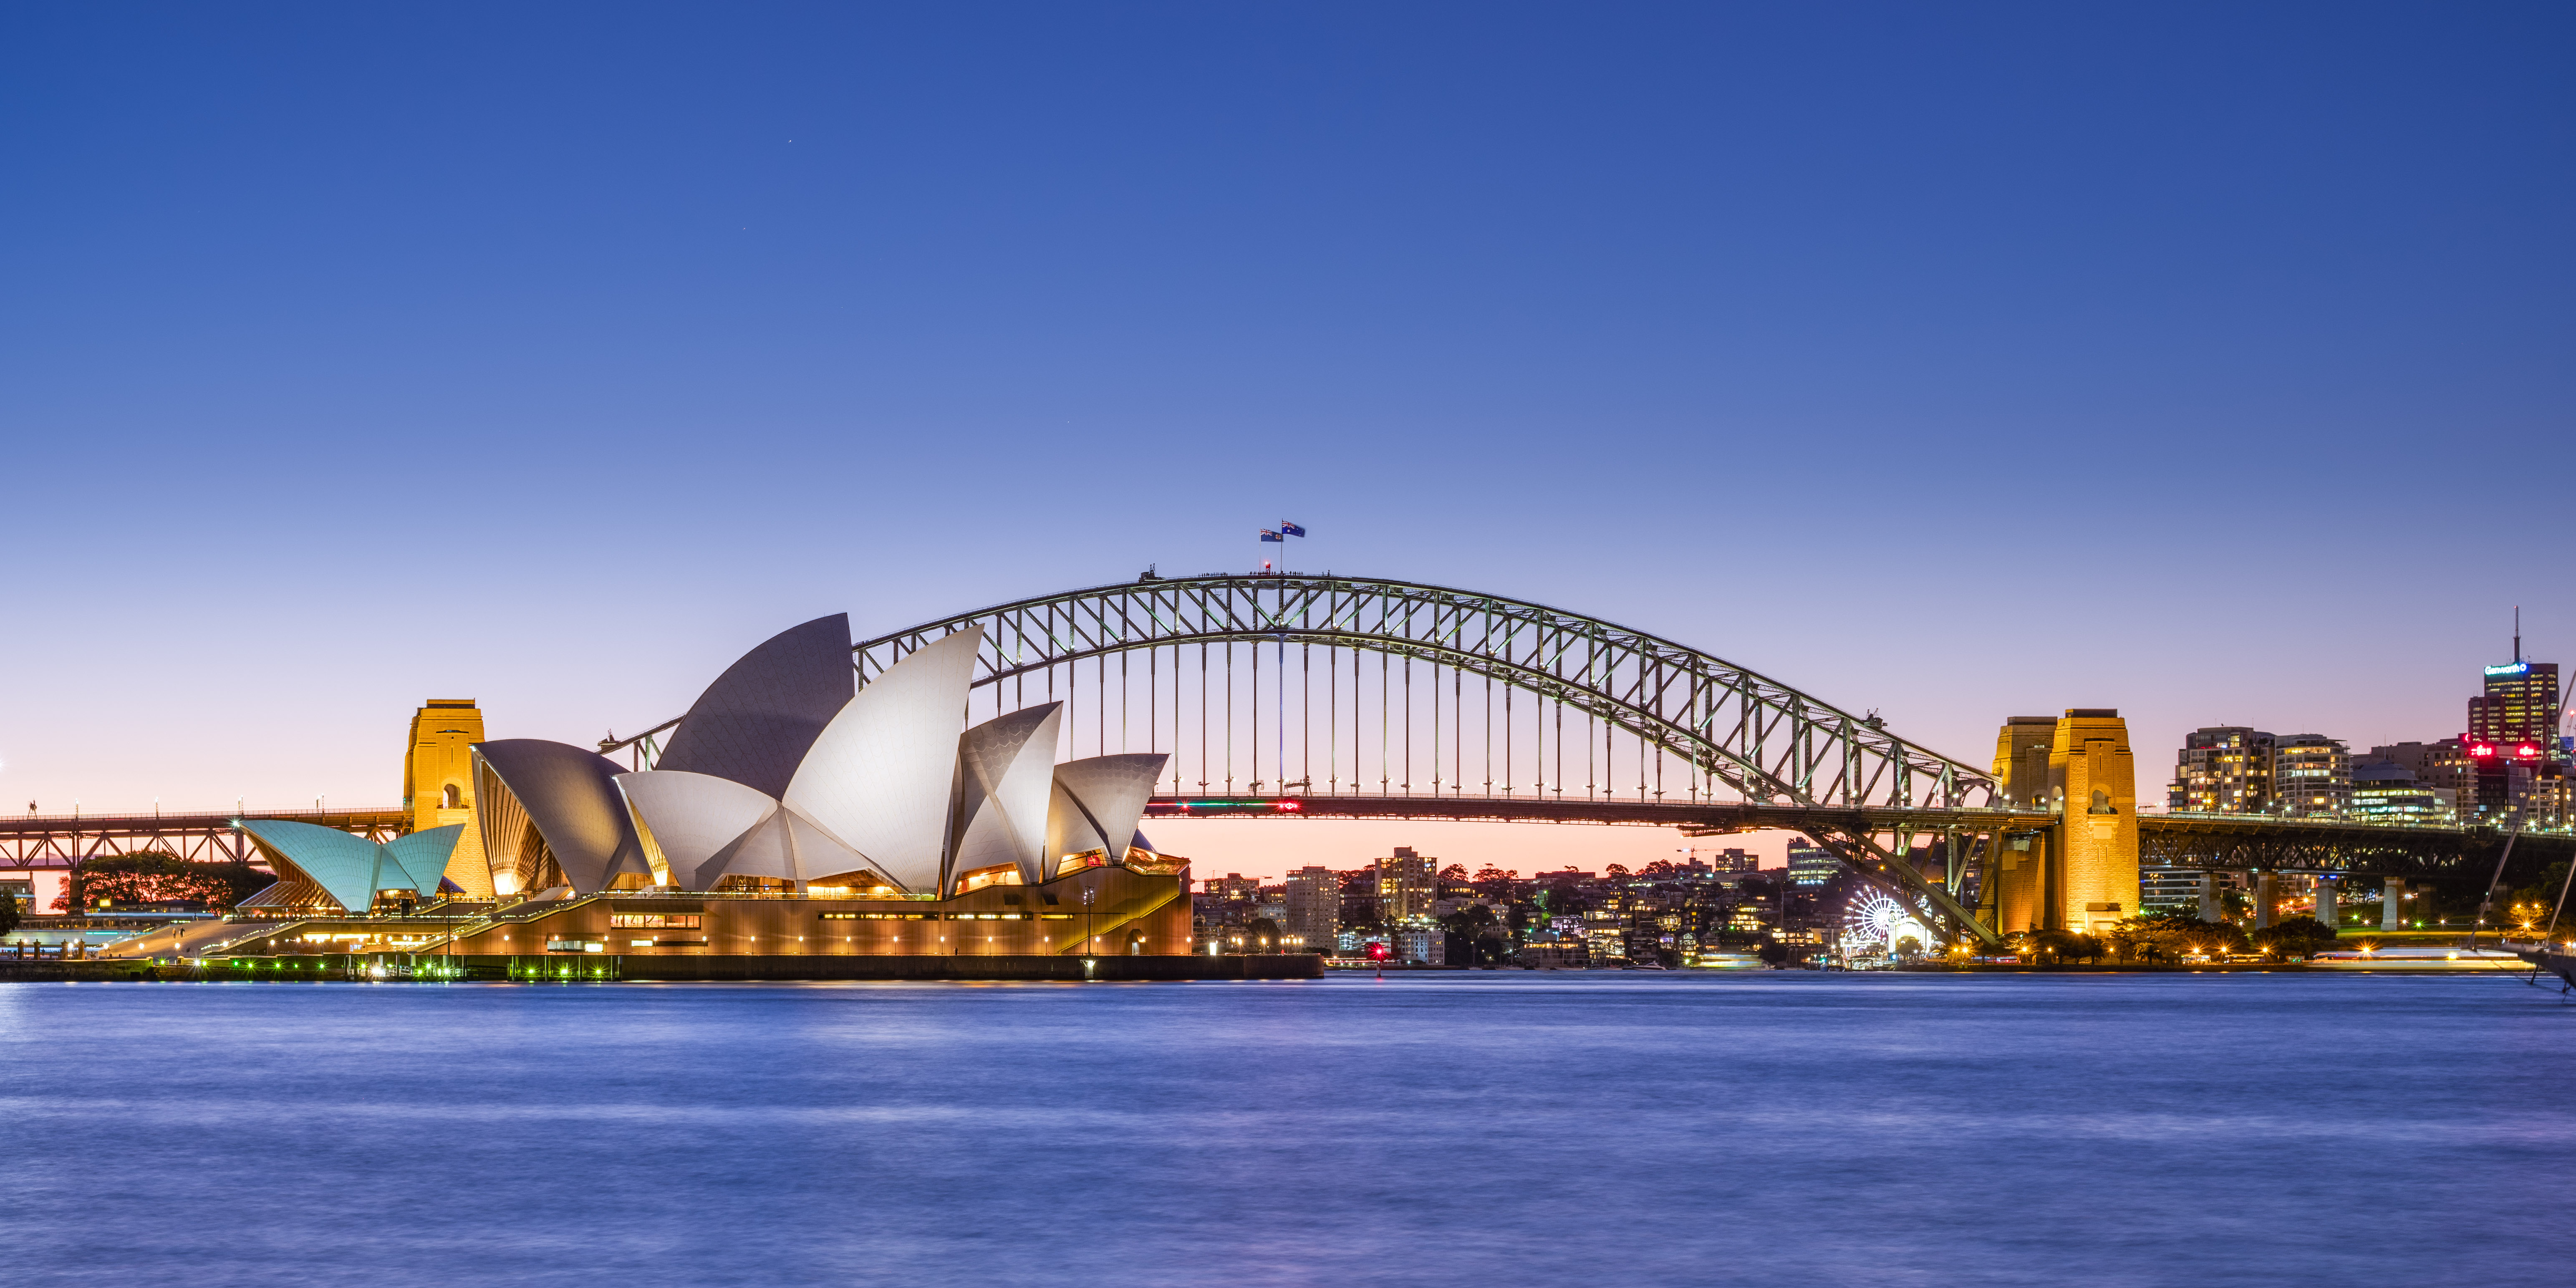 interesting facts about Australia